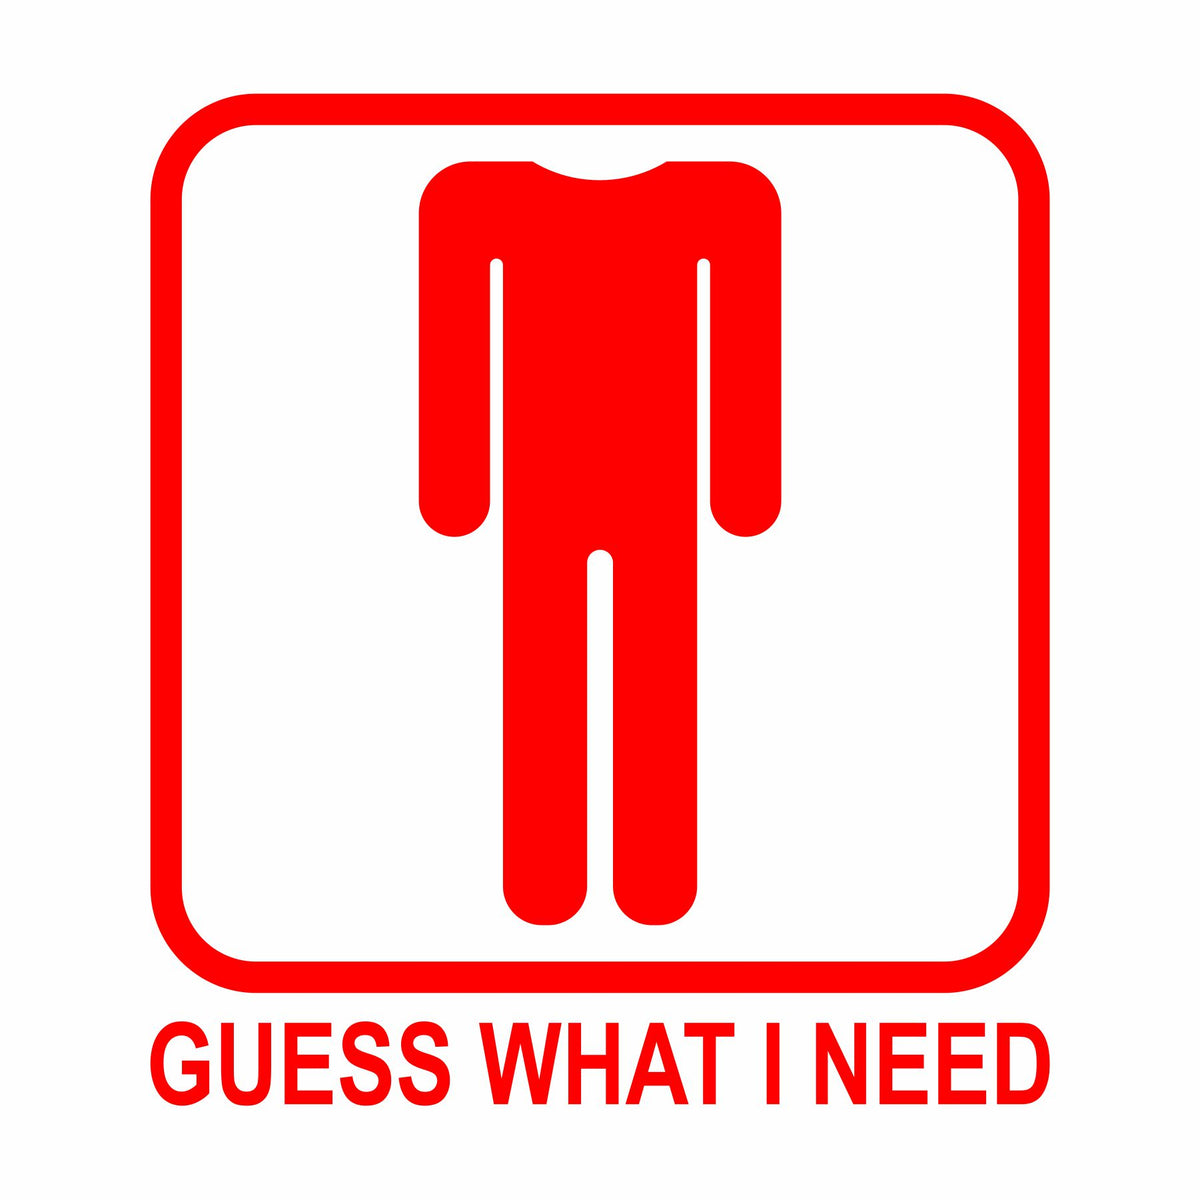 Guess What I Need - Vinyl Decal - Free Shipping